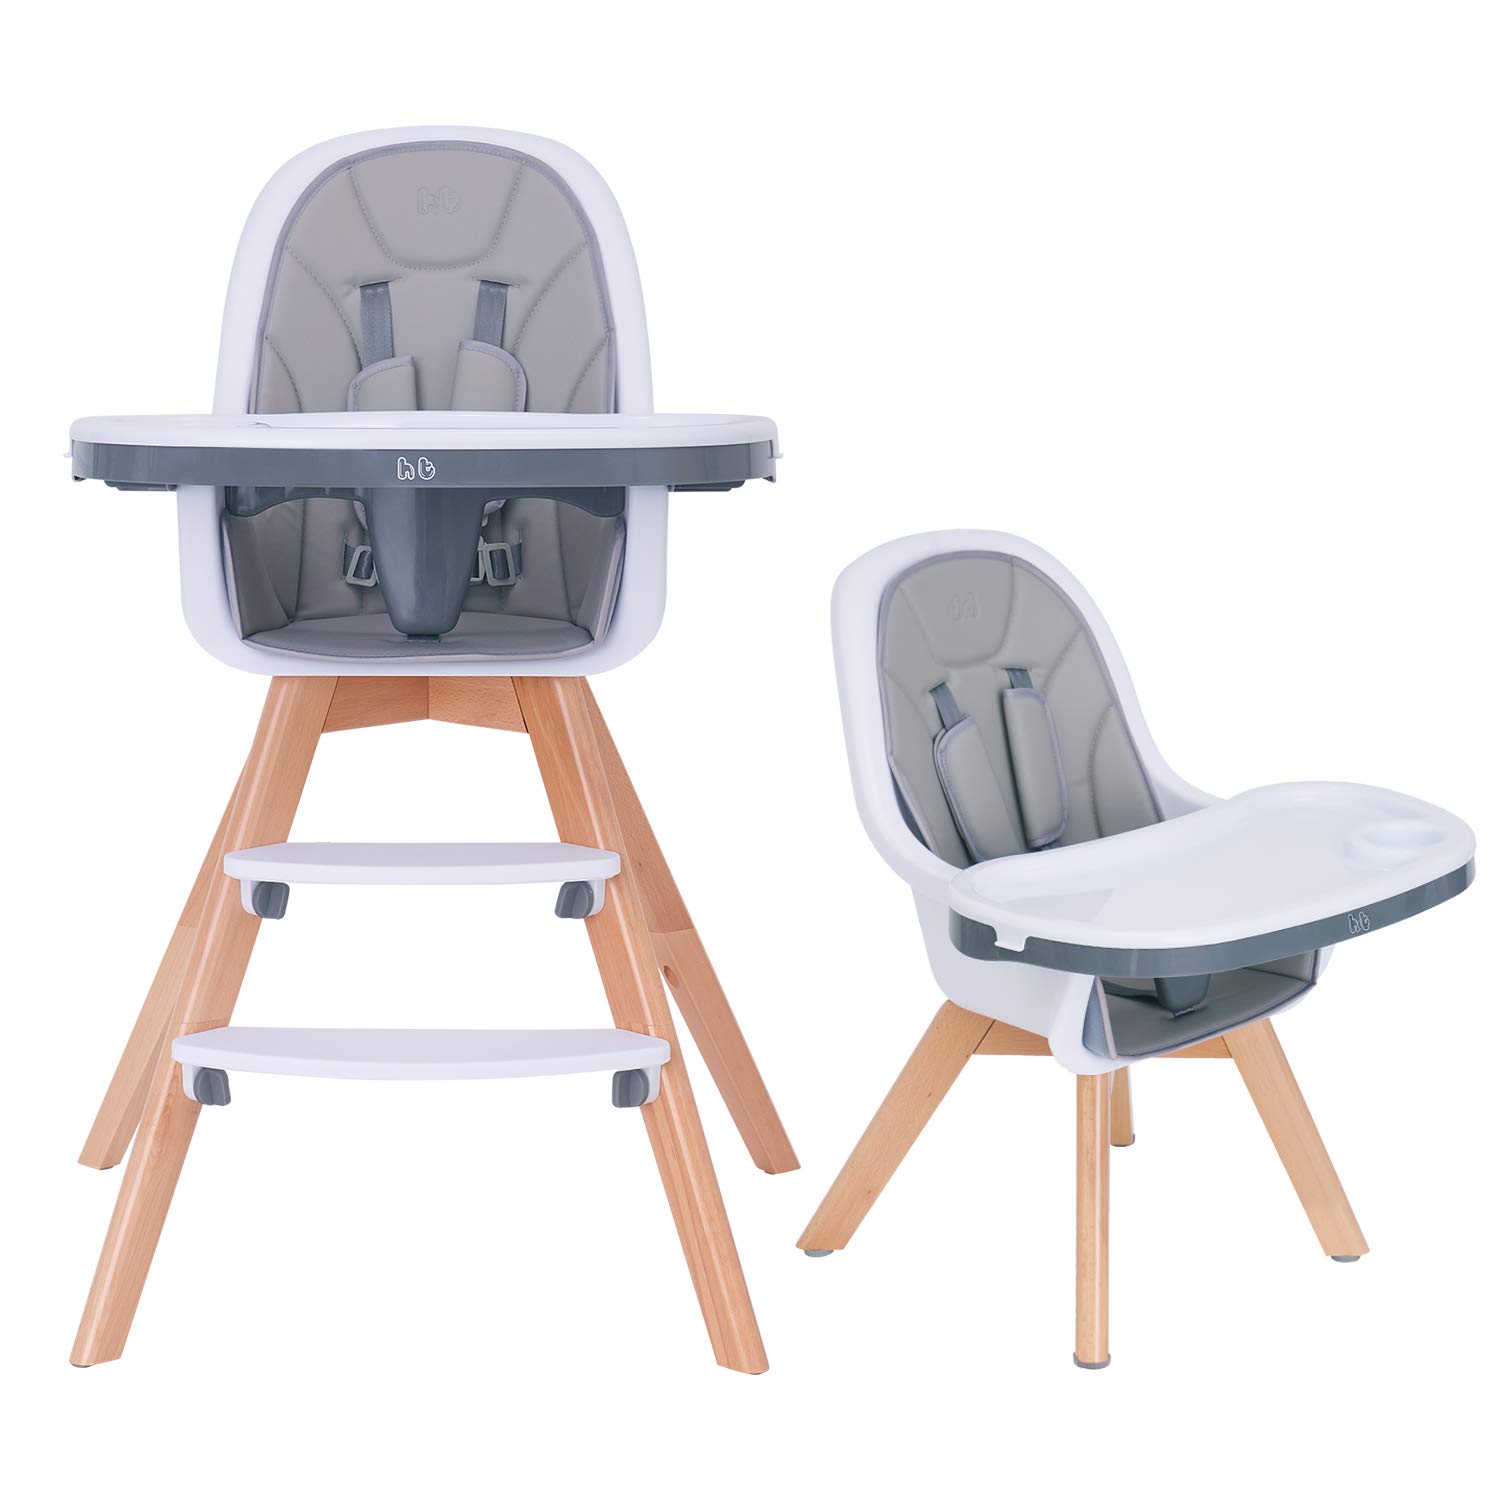 6 Best Portable Baby High Chairs (Comparison & Reviews) - Keep It Portable